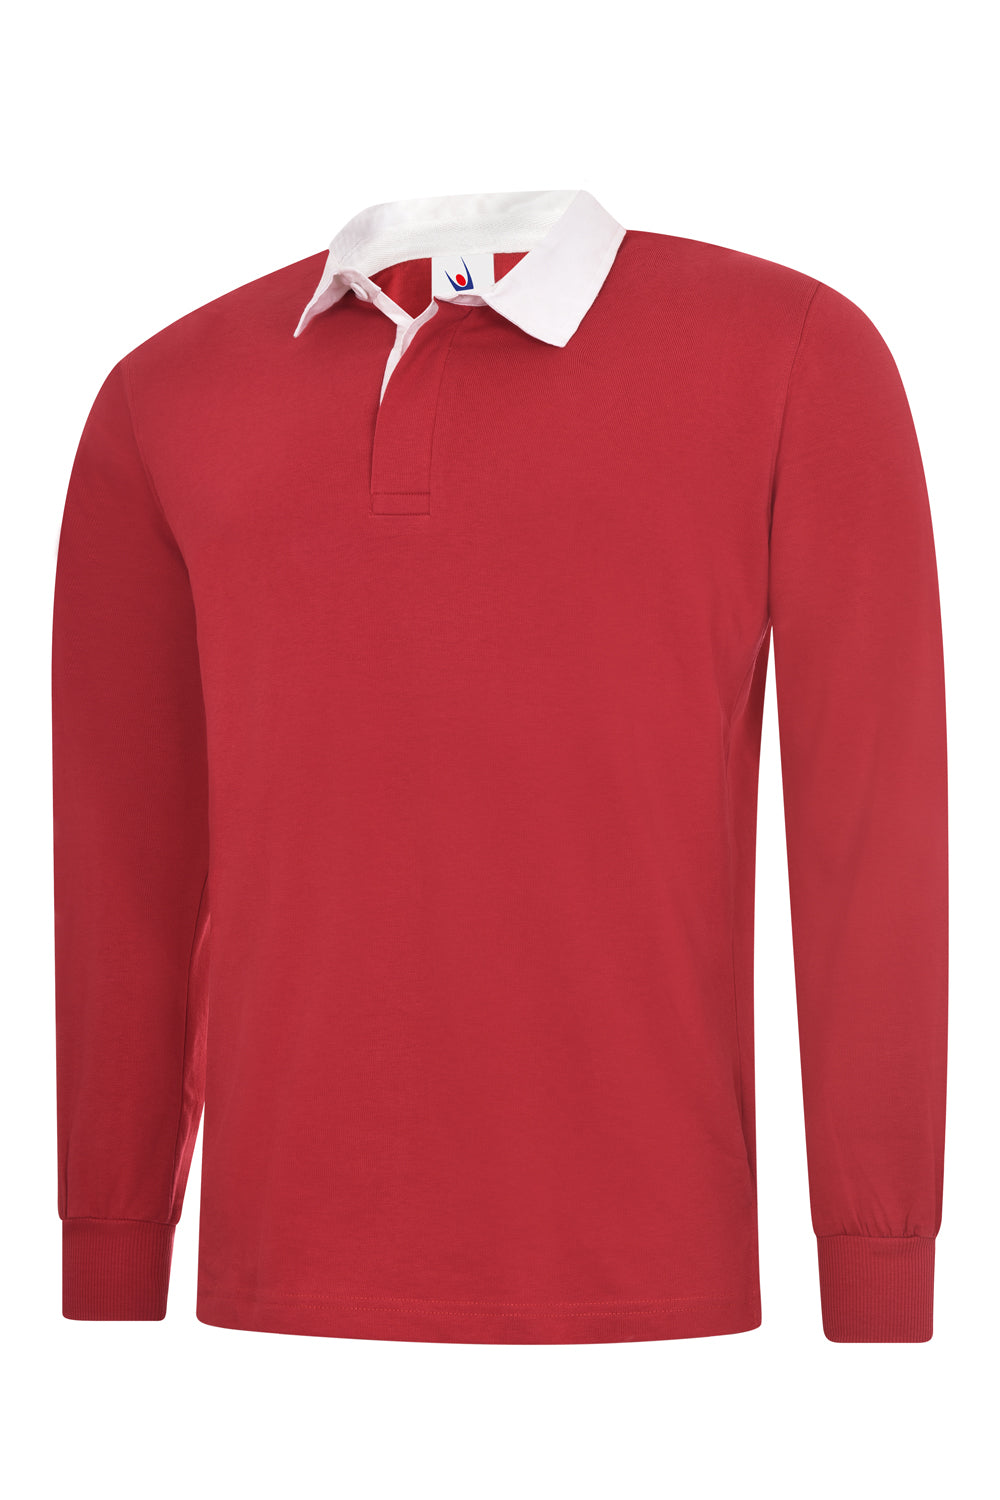 Uneek Classic Rugby Shirt (UC402)